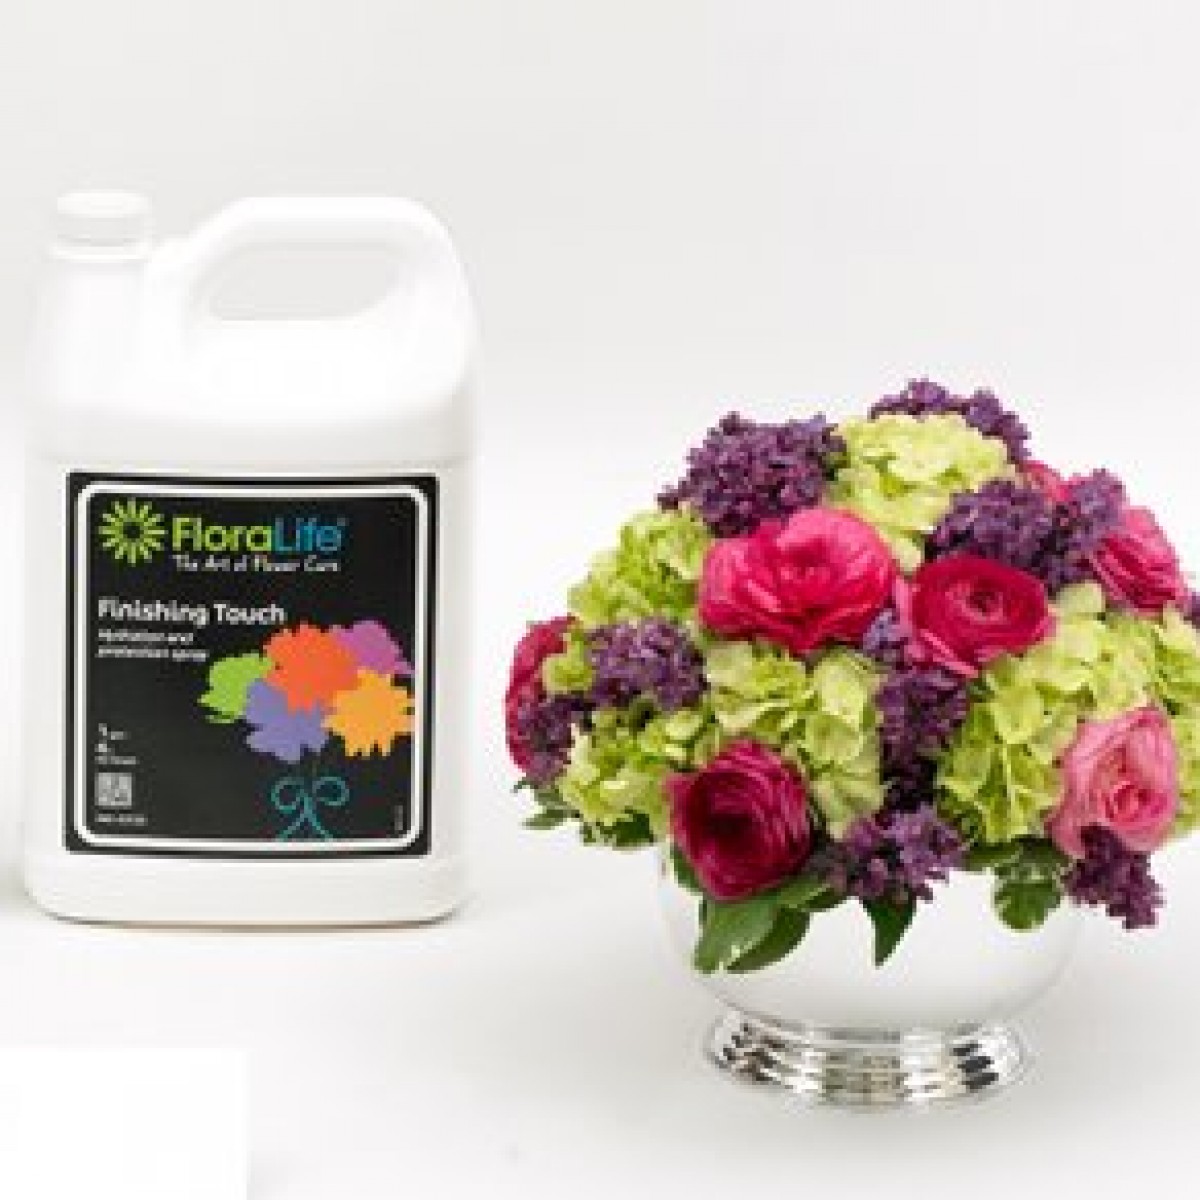 1406 Floralife Finishing Touch 5.67Ltr  - 1 No